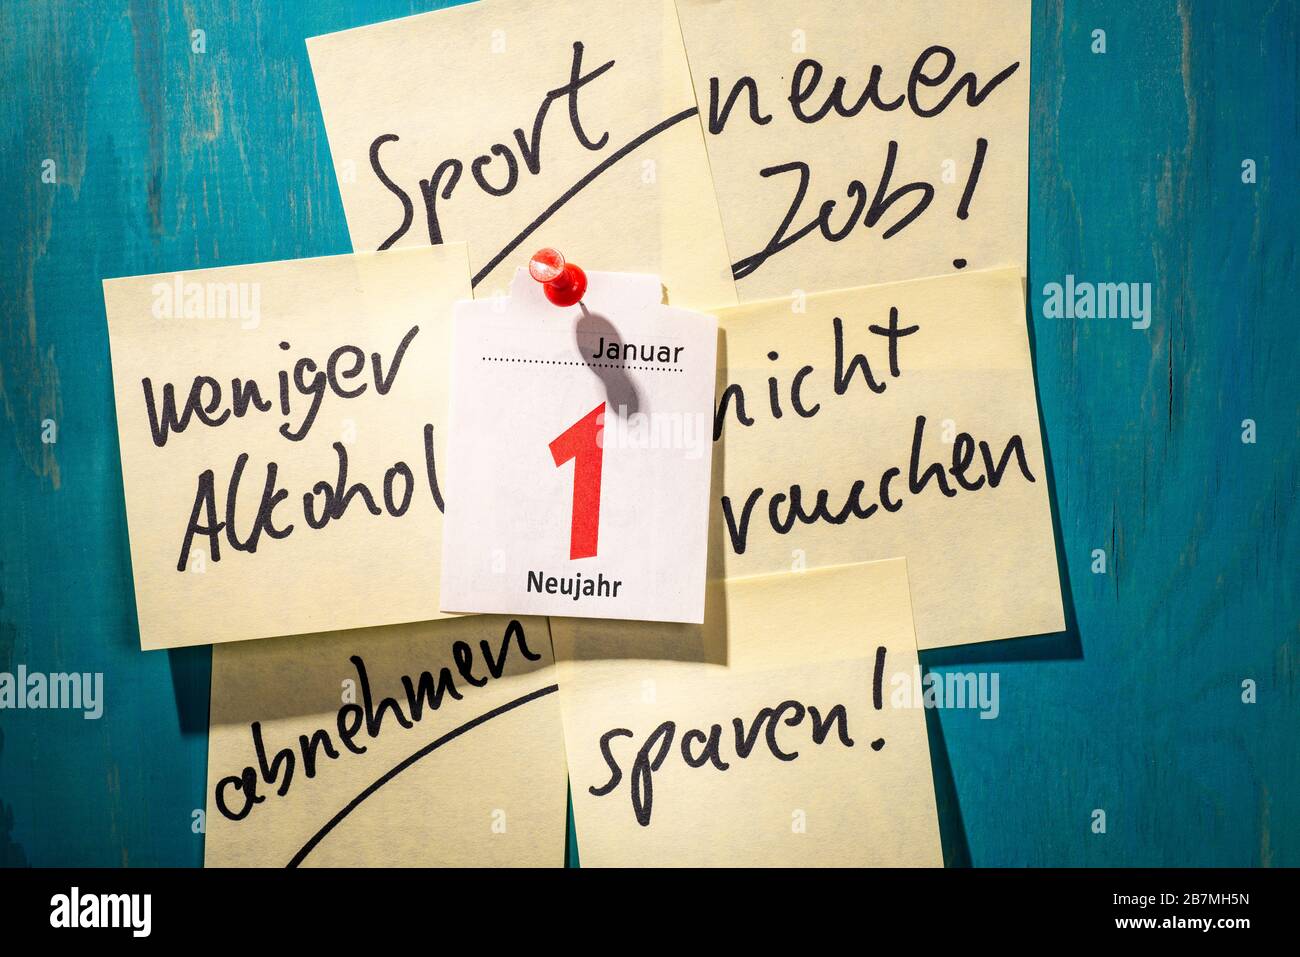 Note with good resolutions on a wall with a calendar page showing the first of January. Stock Photo